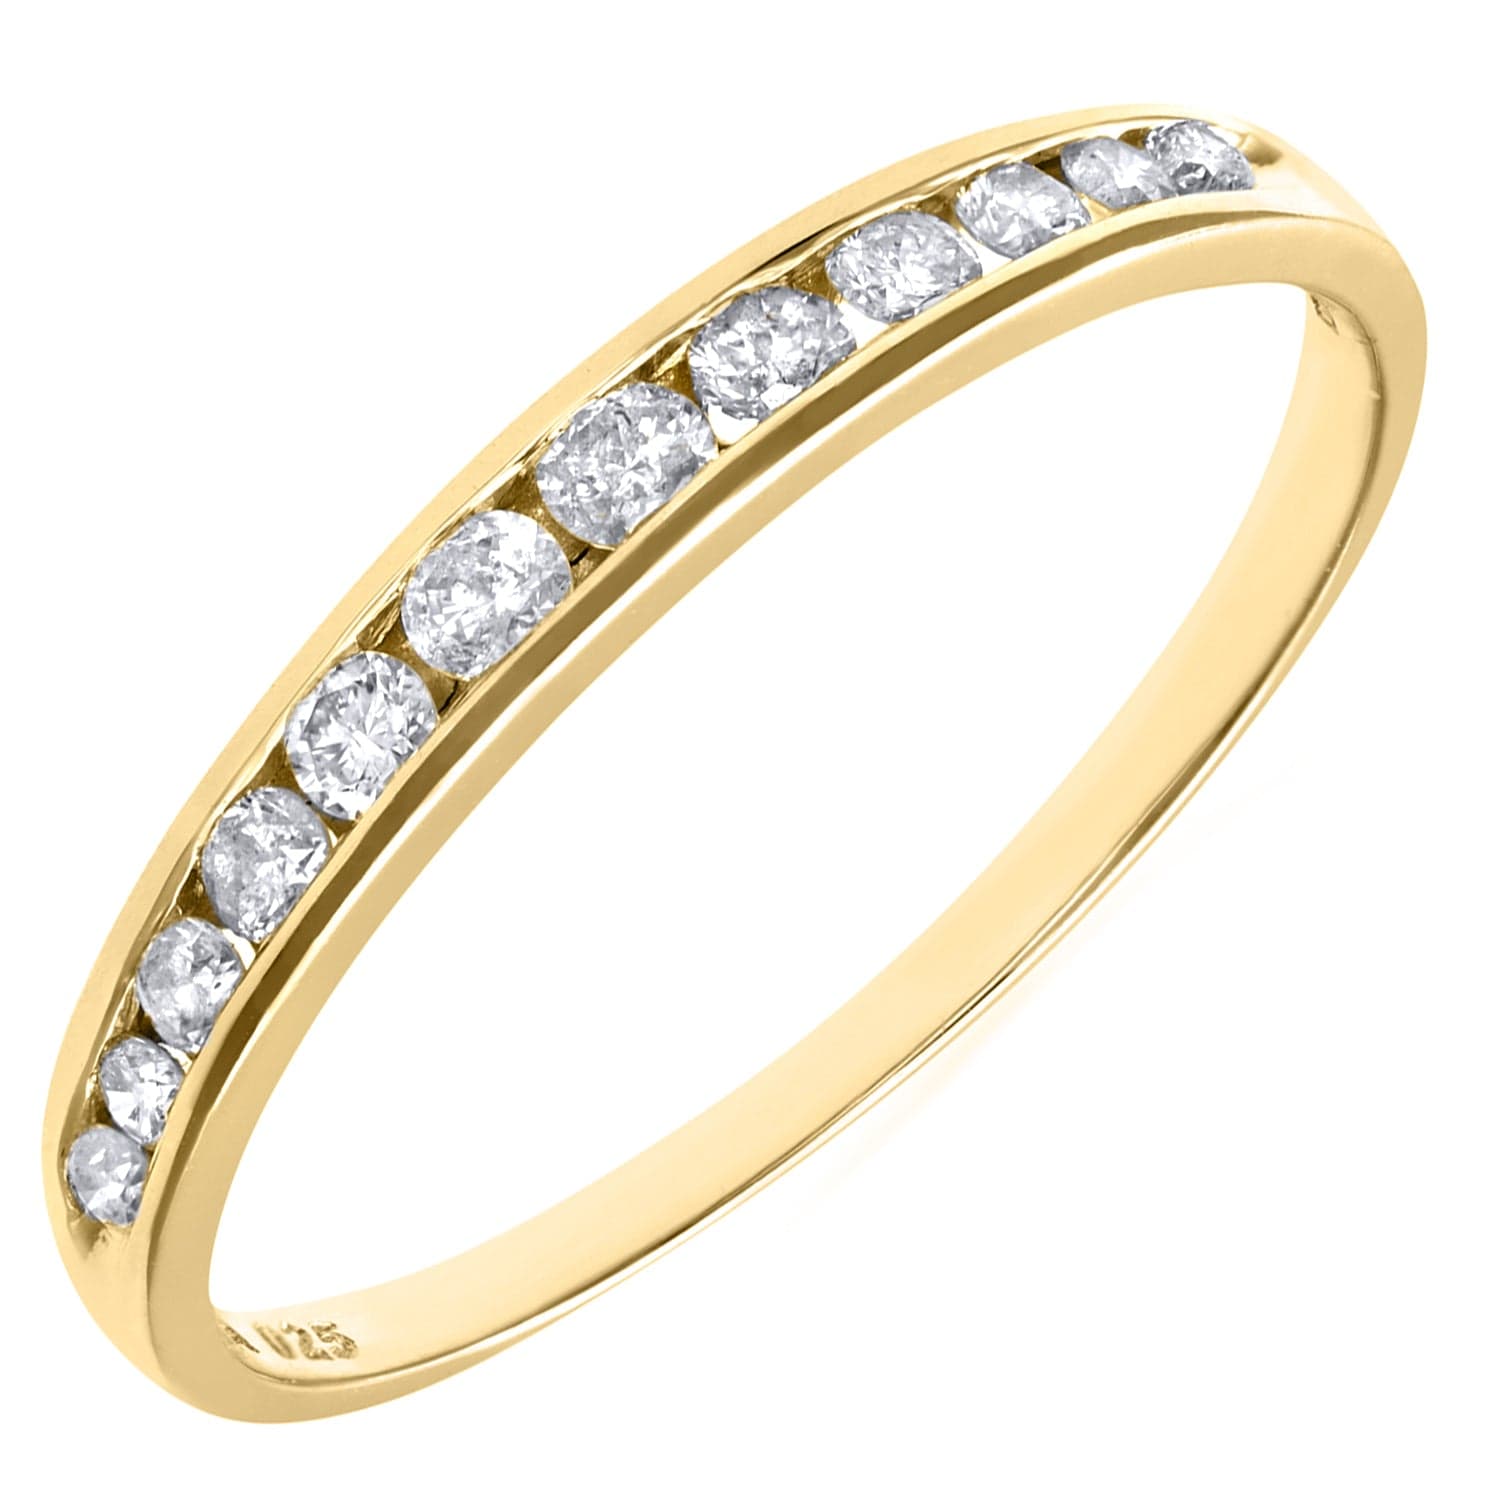 Lynora Luxe Ring Yellow Gold 9ct / Diamond 9ct Yellow Gold 0.25ct Diamond Eternity Ring